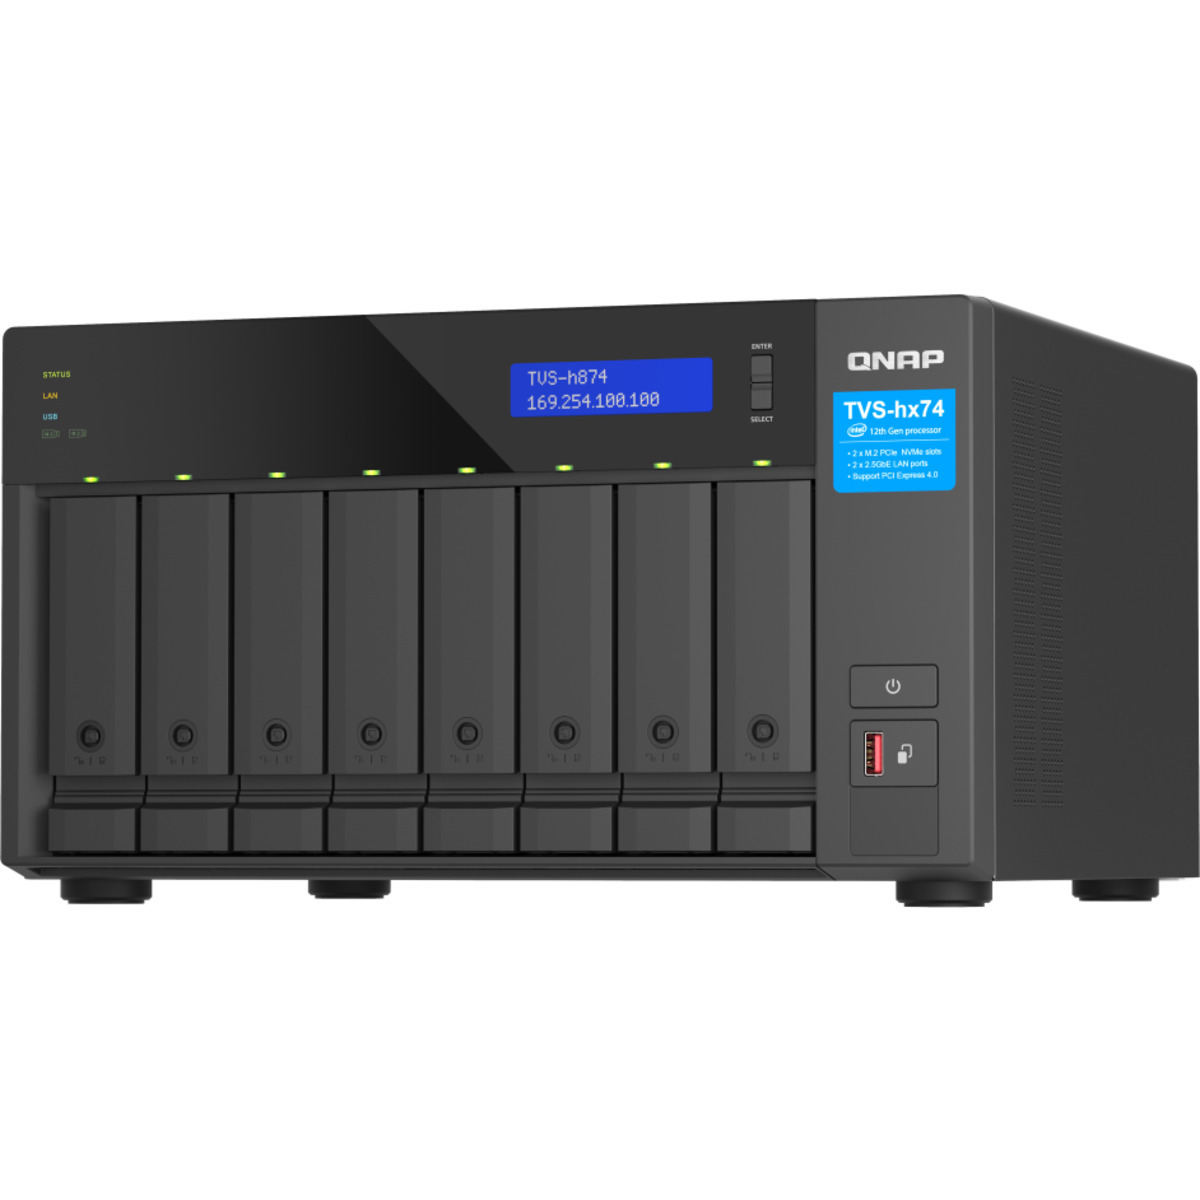 buy $4934 QNAP TVS-h874 Core i5 96tb Desktop NAS - Network Attached Storage Device 8x12000gb Seagate IronWolf Pro ST12000NT001 3.5 7200rpm SATA 6Gb/s HDD NAS Class Drives Installed - Burn-In Tested - nas headquarters buy network attached storage server device das new raid-5 free shipping simply usa TVS-h874 Core i5